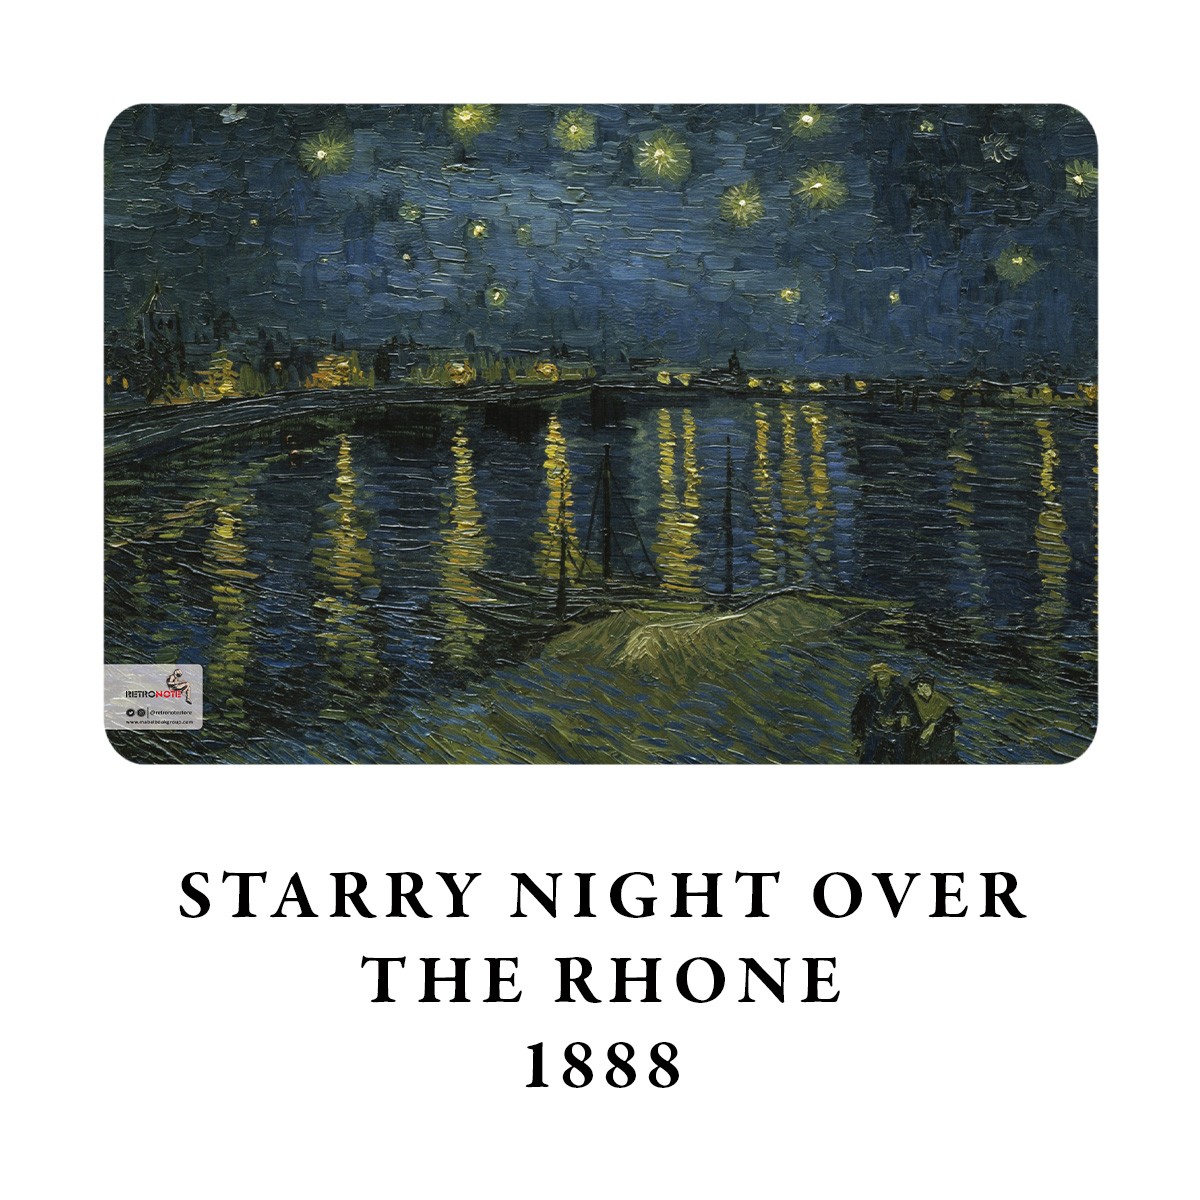 Starry Night Over the Rhone / Van Gogh, 1888 / A4 Defter -2